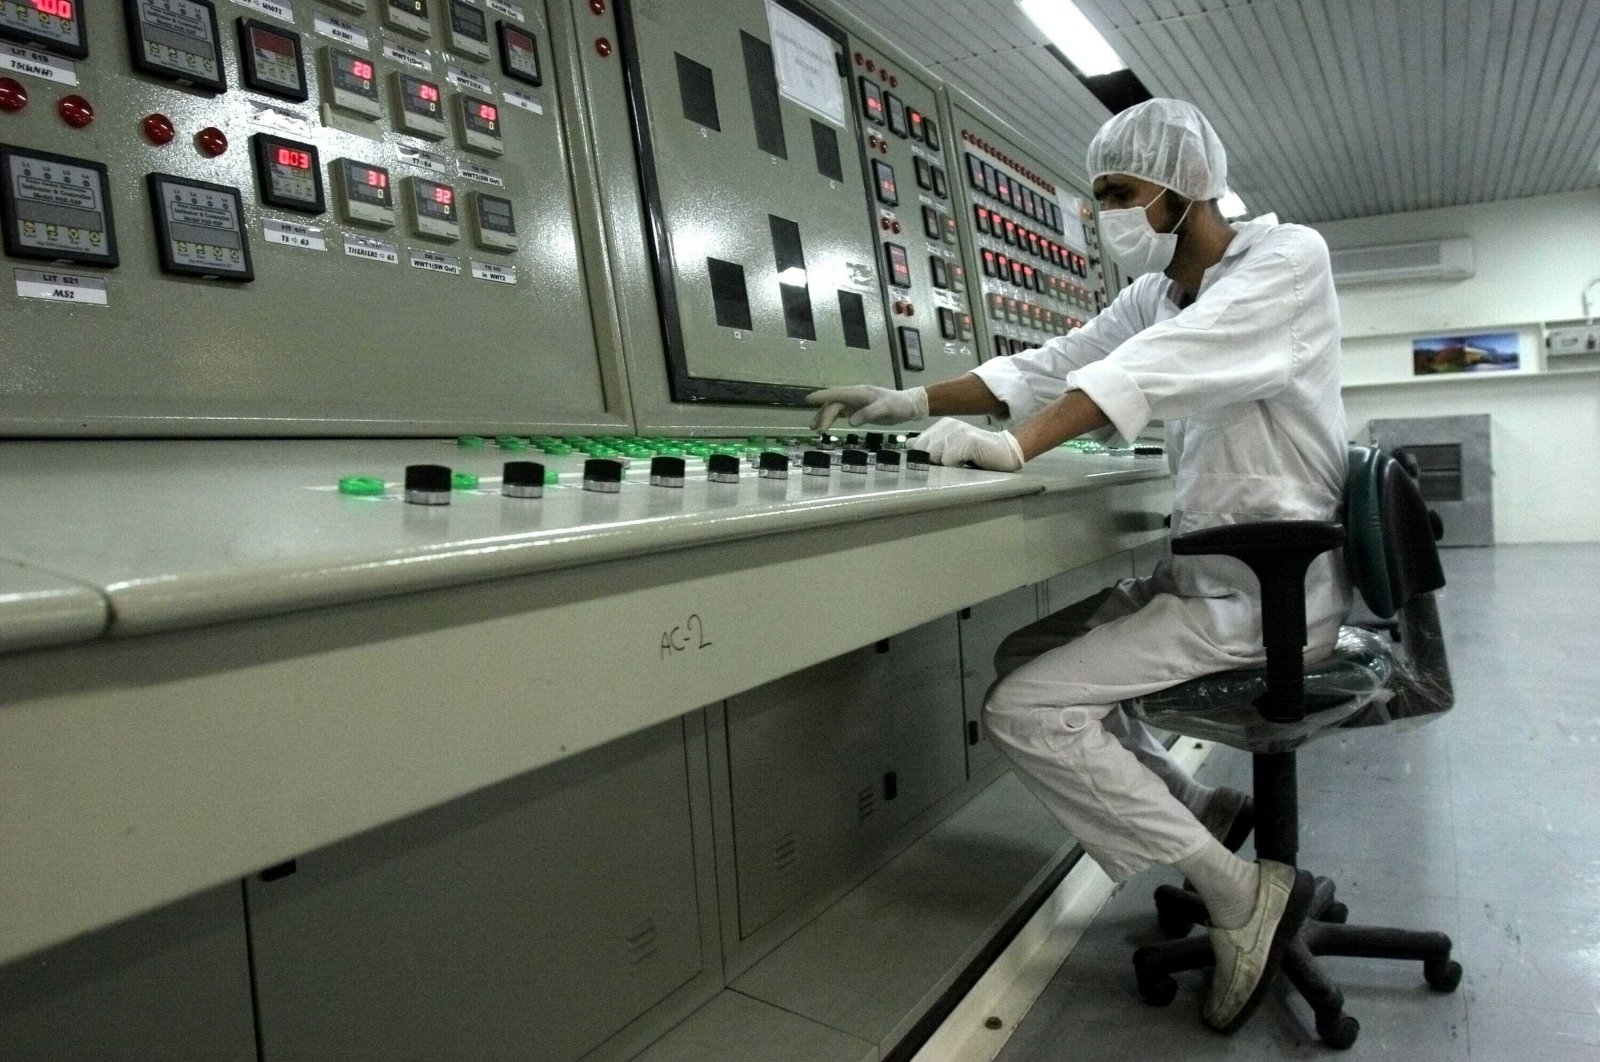 An Iranian technician works at the Uranium Conversion Facility just outside the city of Isfahan, 410 kilometers (255 miles) south of the capital Tehran, Iran, Feb. 3, 2007. (AP Photo)